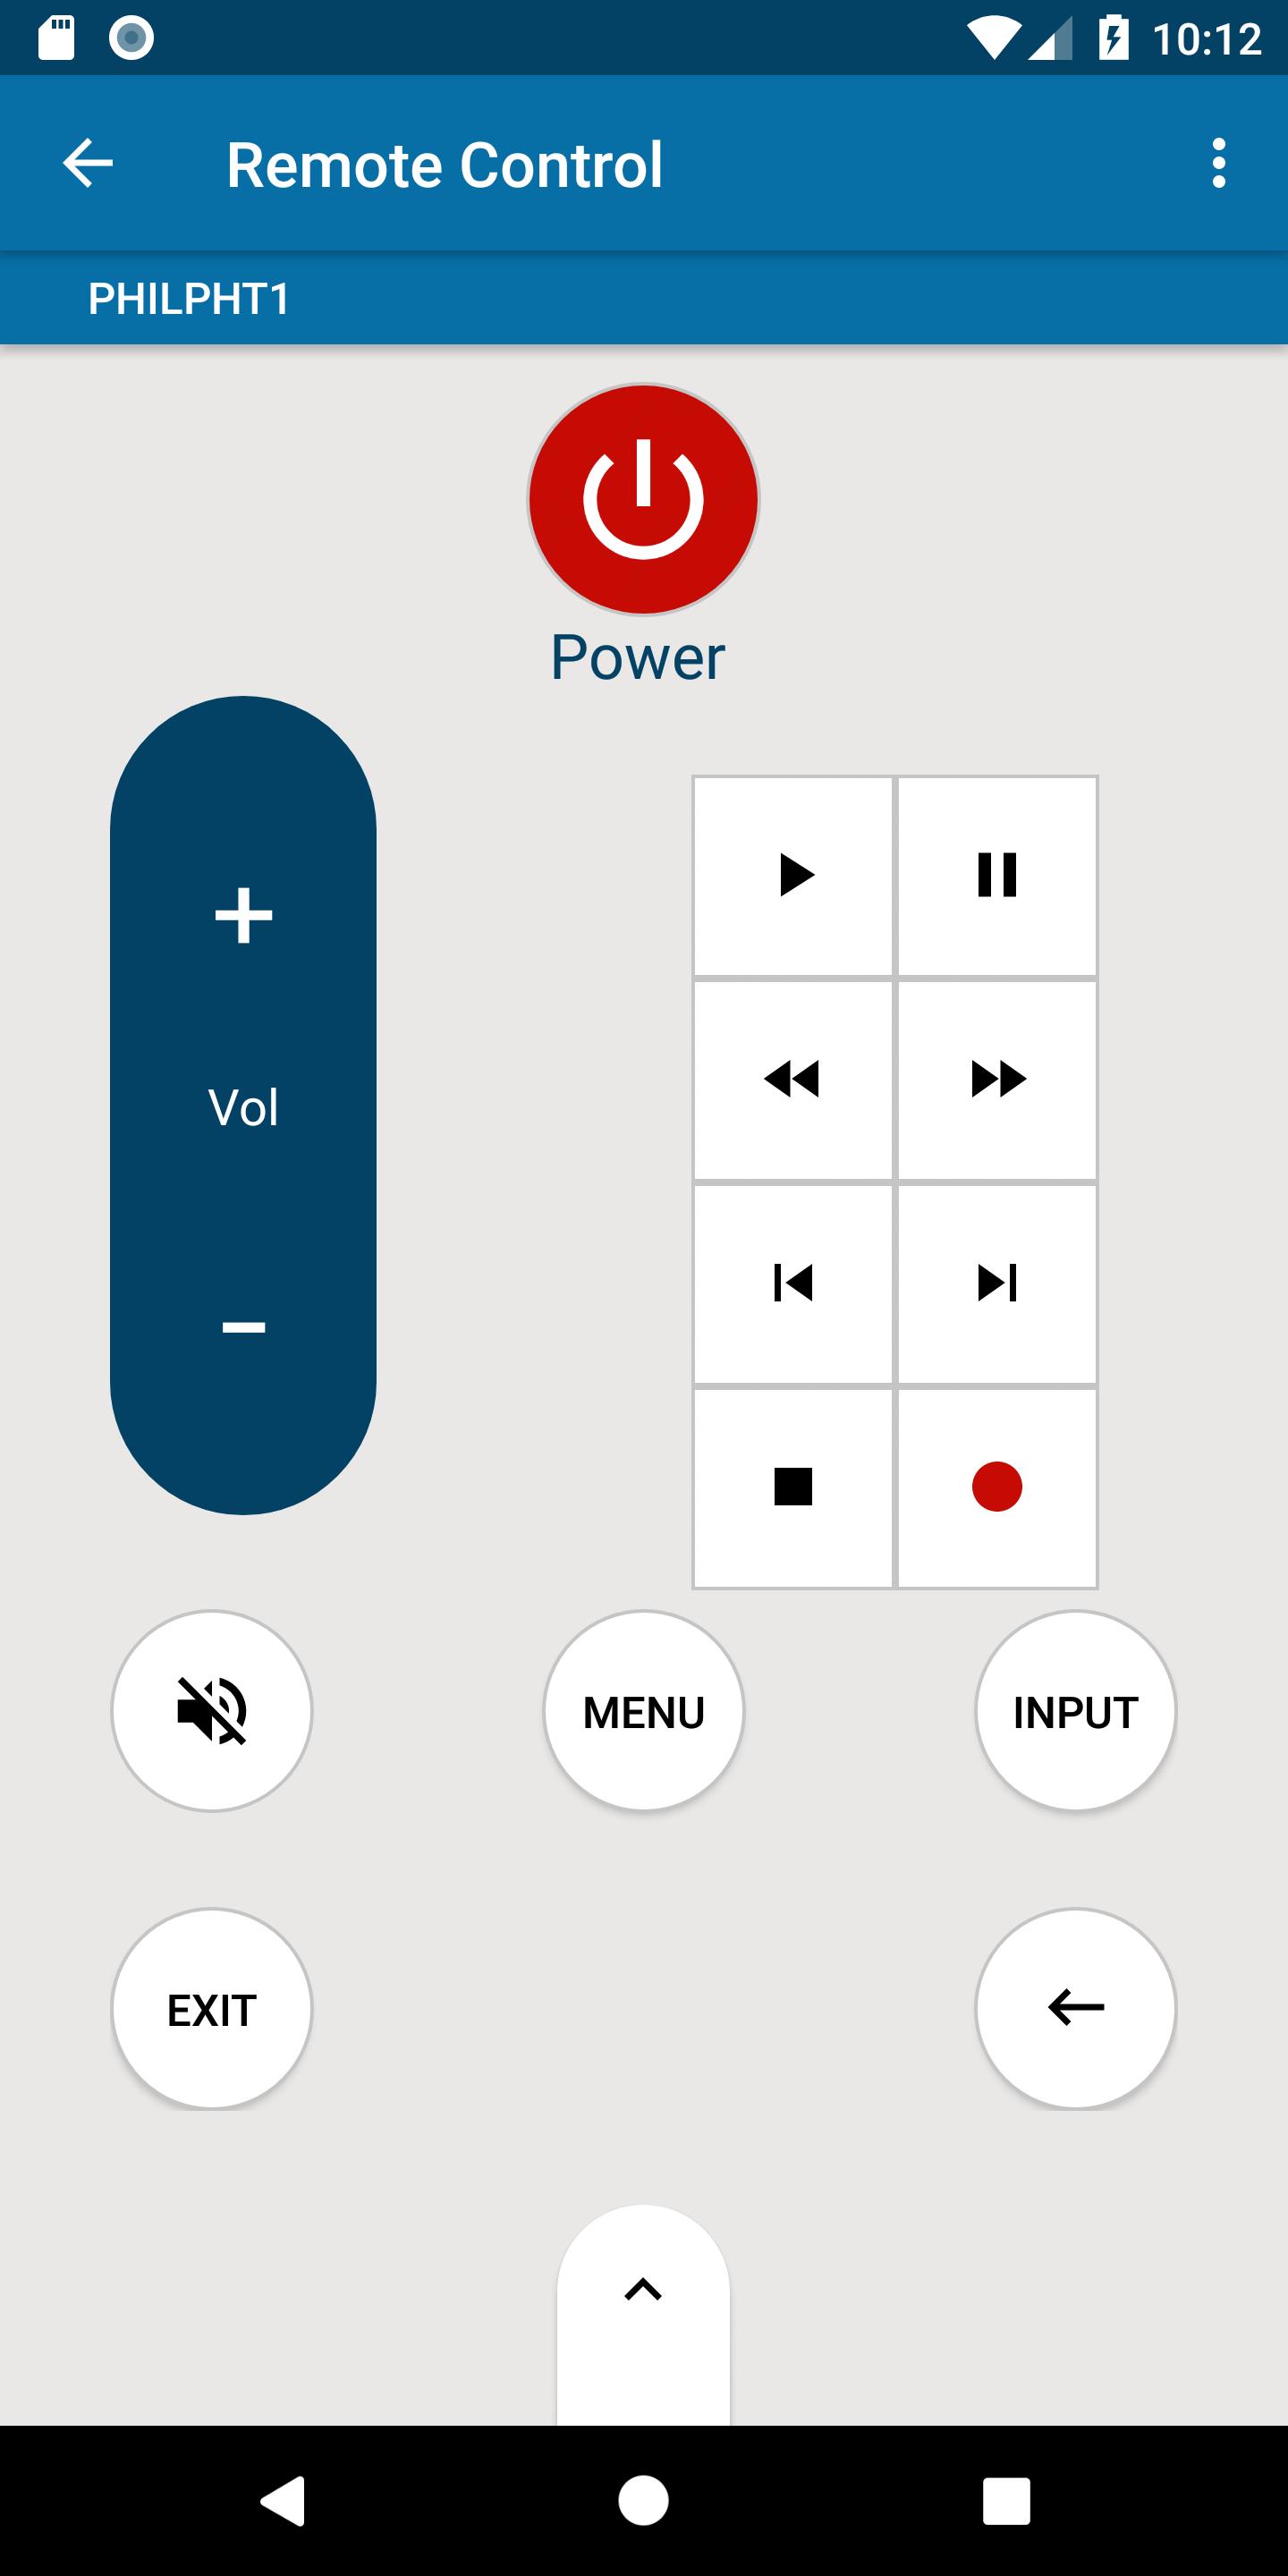 Philips Home Theater Remote for Android - APK Download